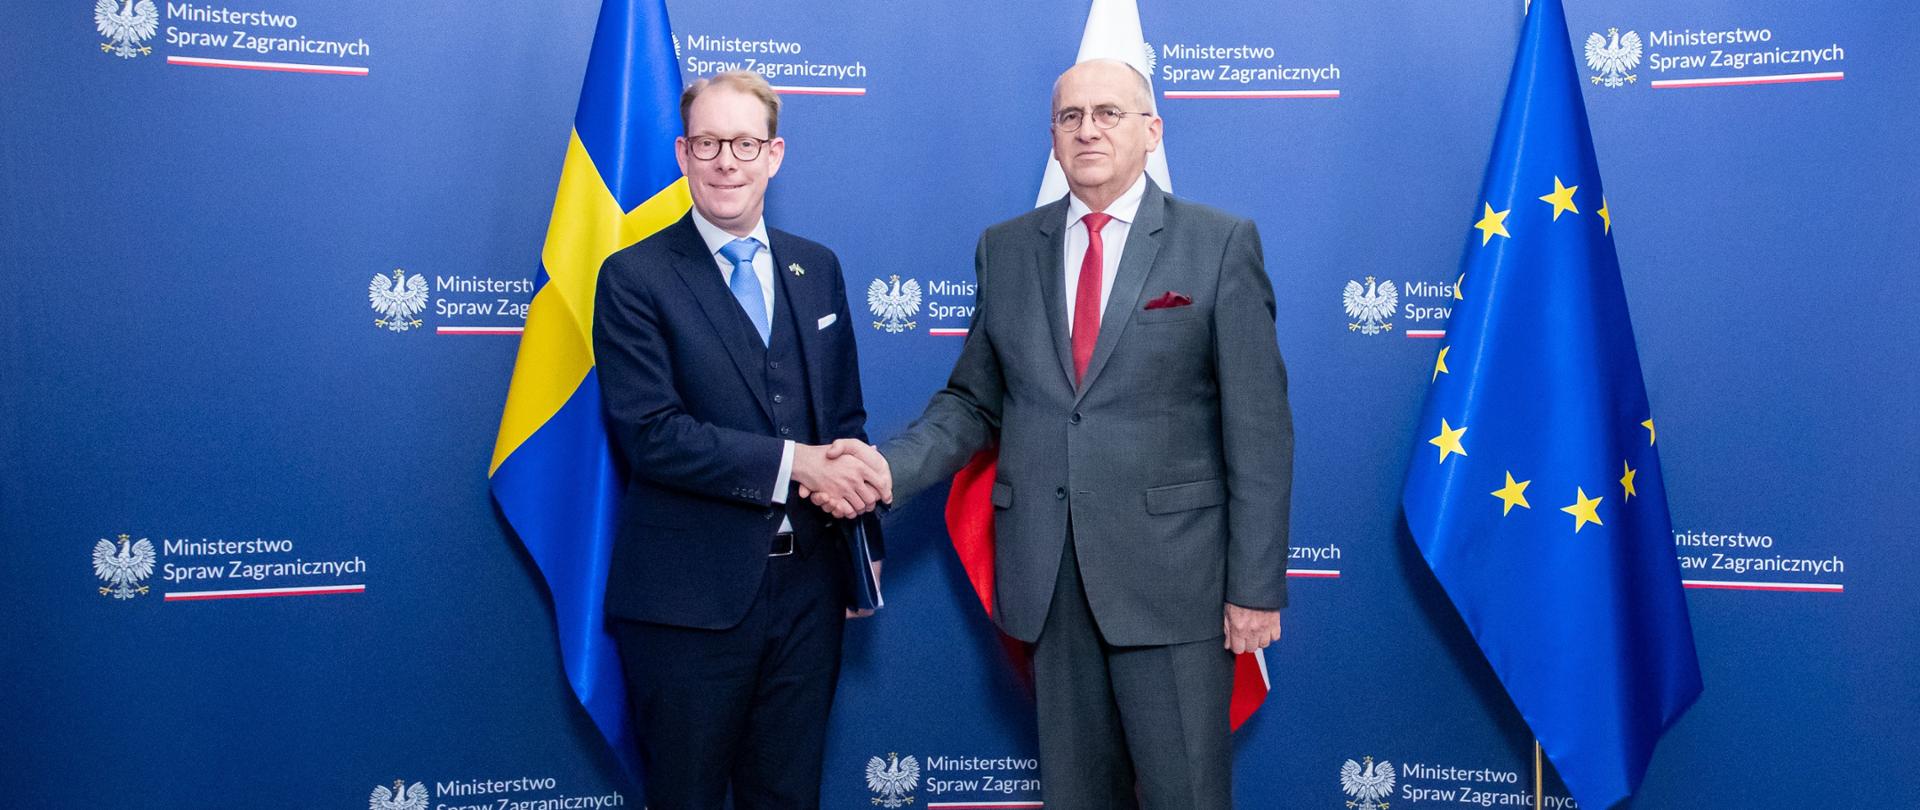 Minister Zbigniew Rau met with Sweden’s Minister for Foreign Affairs Tobias Billström